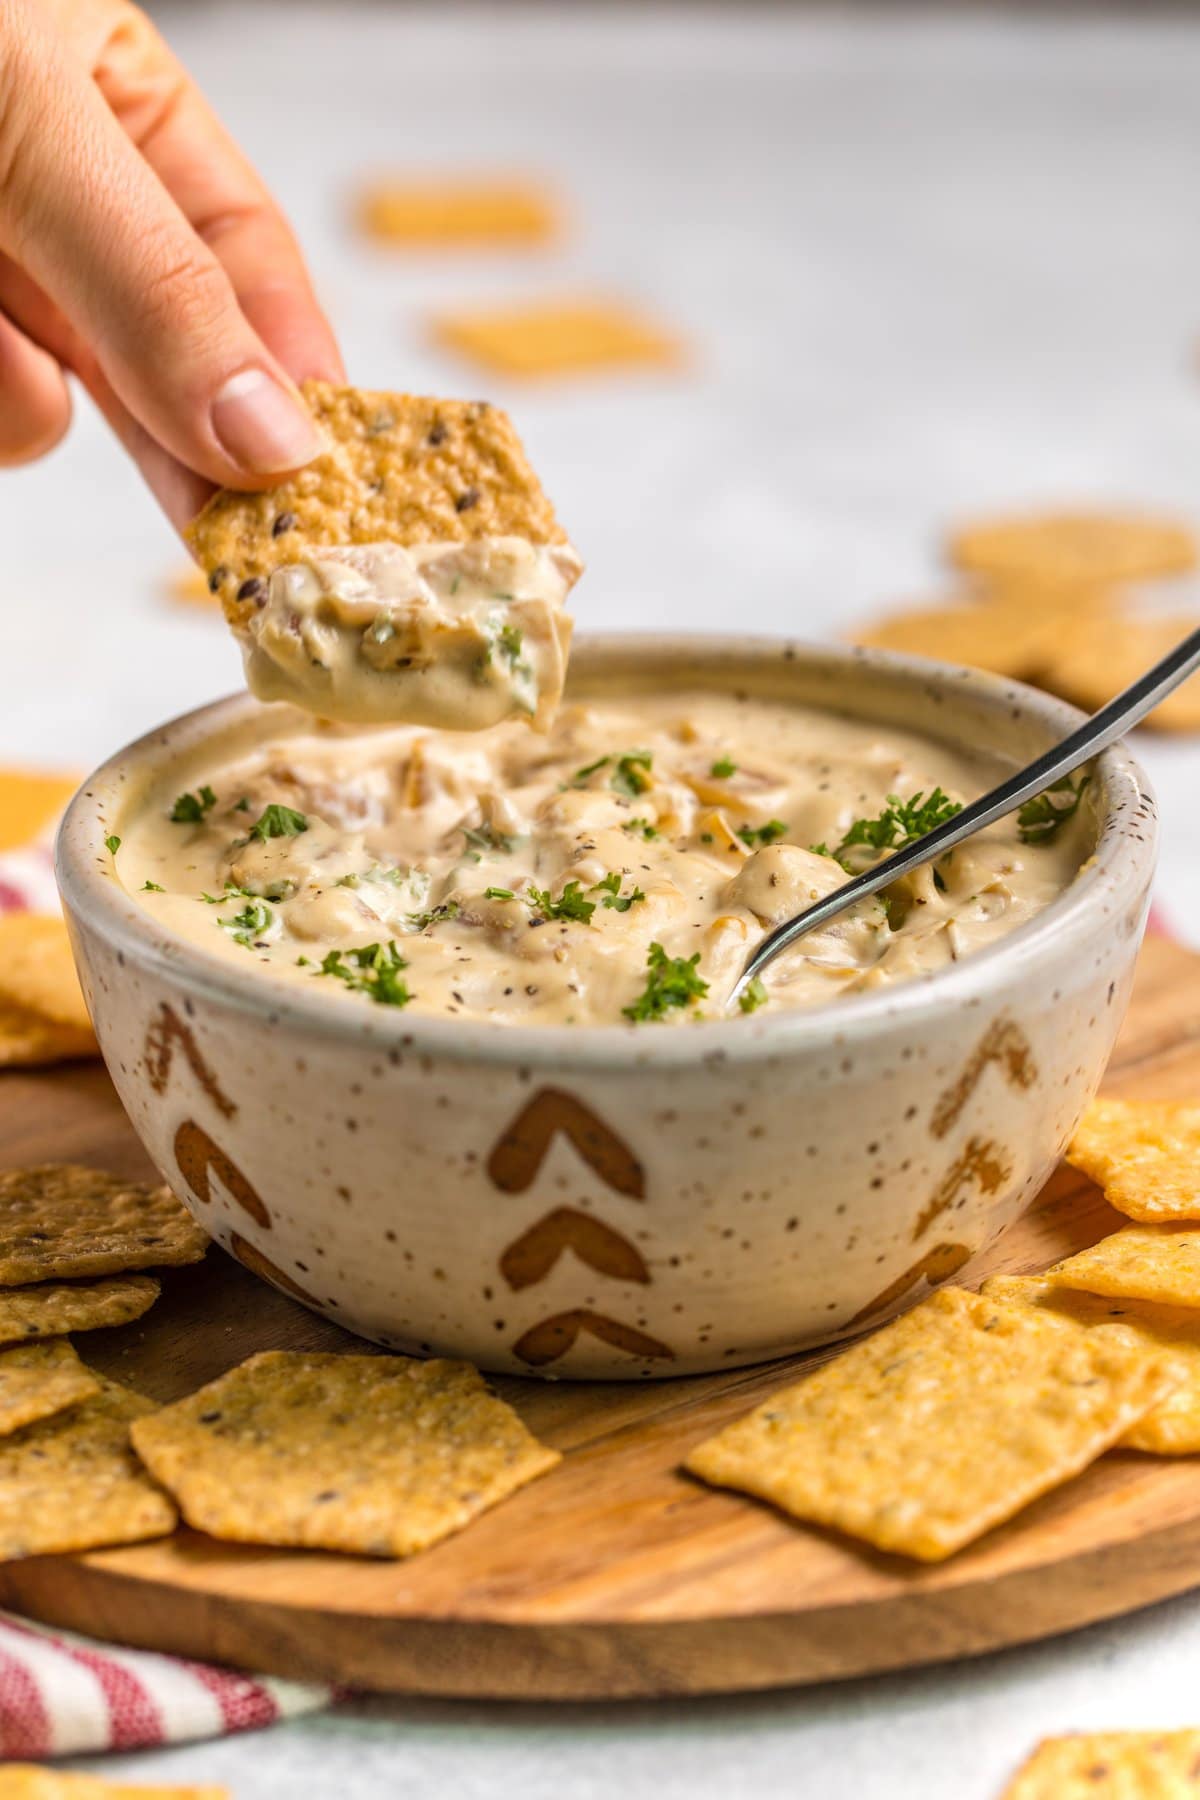 hand scooping cracker into vegan french onion dip in white speckled bowl on wood serving tray